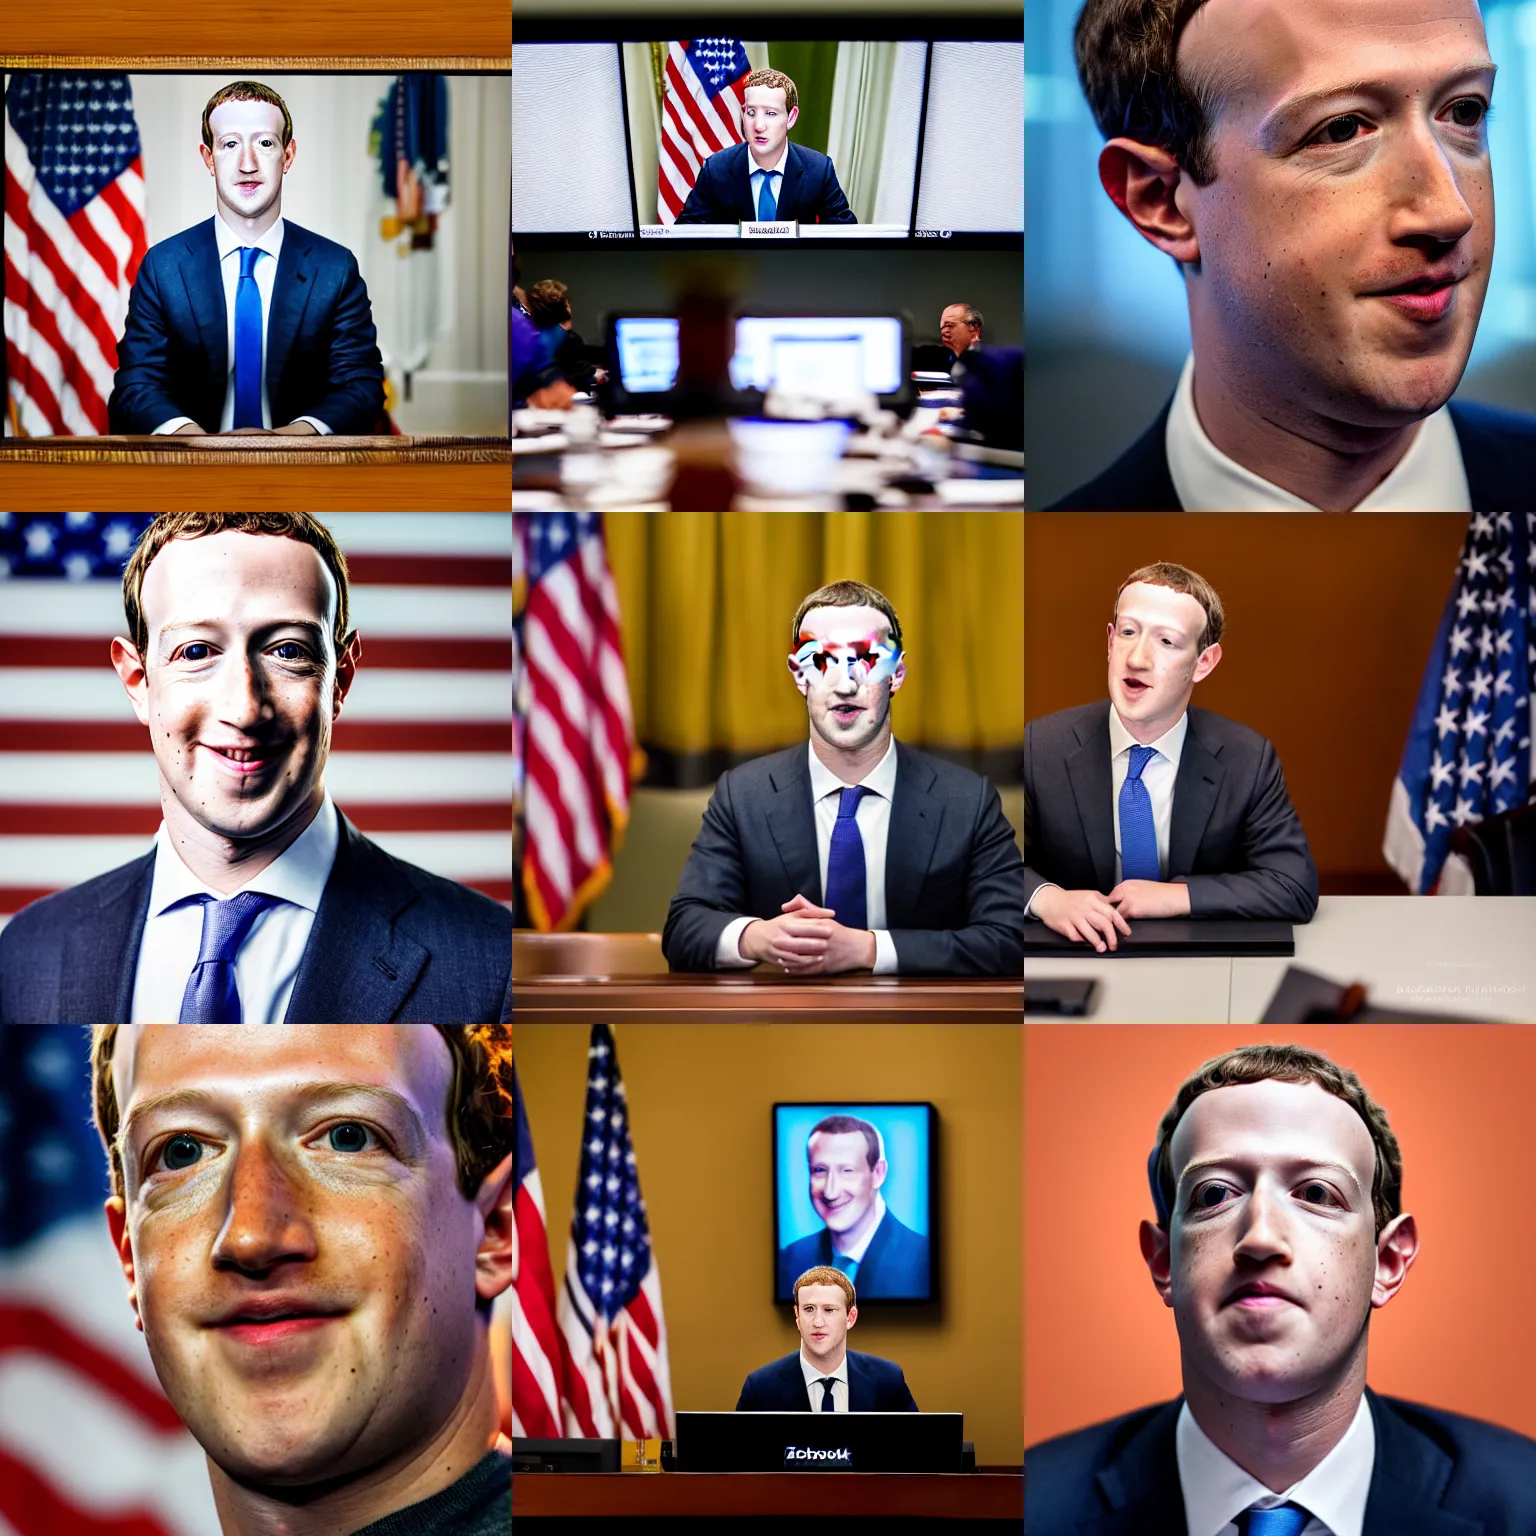 Prompt: headshot of Mark Zuckerberg as the president of the united states in the situation room, EOS-1D, f/1.4, ISO 200, 1/160s, 8K, RAW, unedited, symmetrical balance, in-frame, Photoshop, Nvidia, Topaz AI